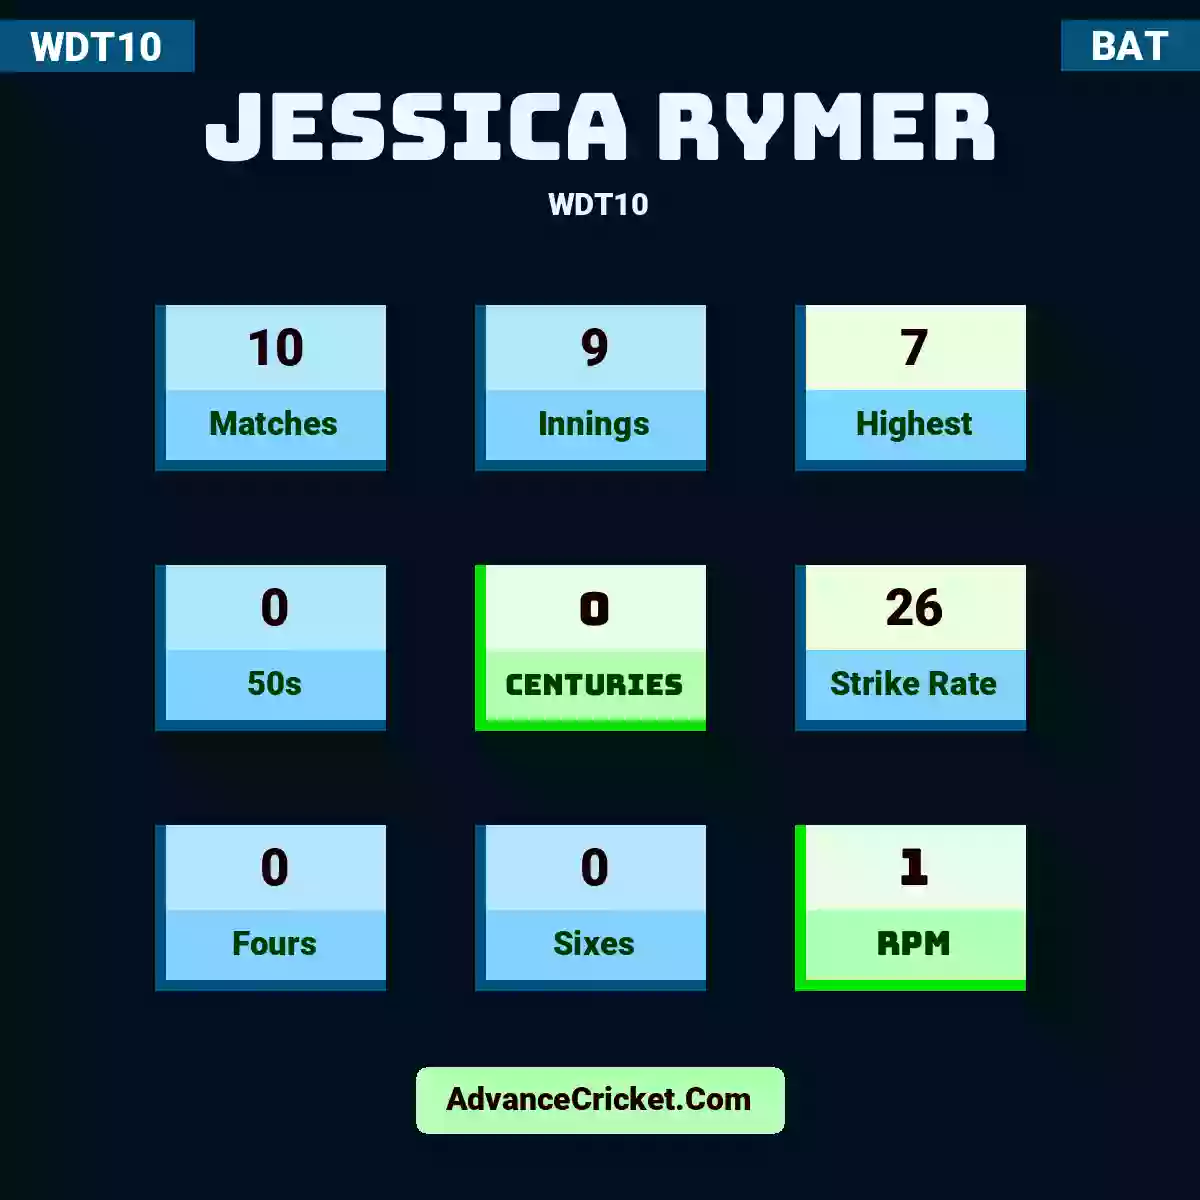 Jessica Rymer WDT10 , Jessica Rymer played 10 matches, scored 7 runs as highest, 0 half-centuries, and 0 centuries, with a strike rate of 26. J.Rymer hit 0 fours and 0 sixes, with an RPM of 1.